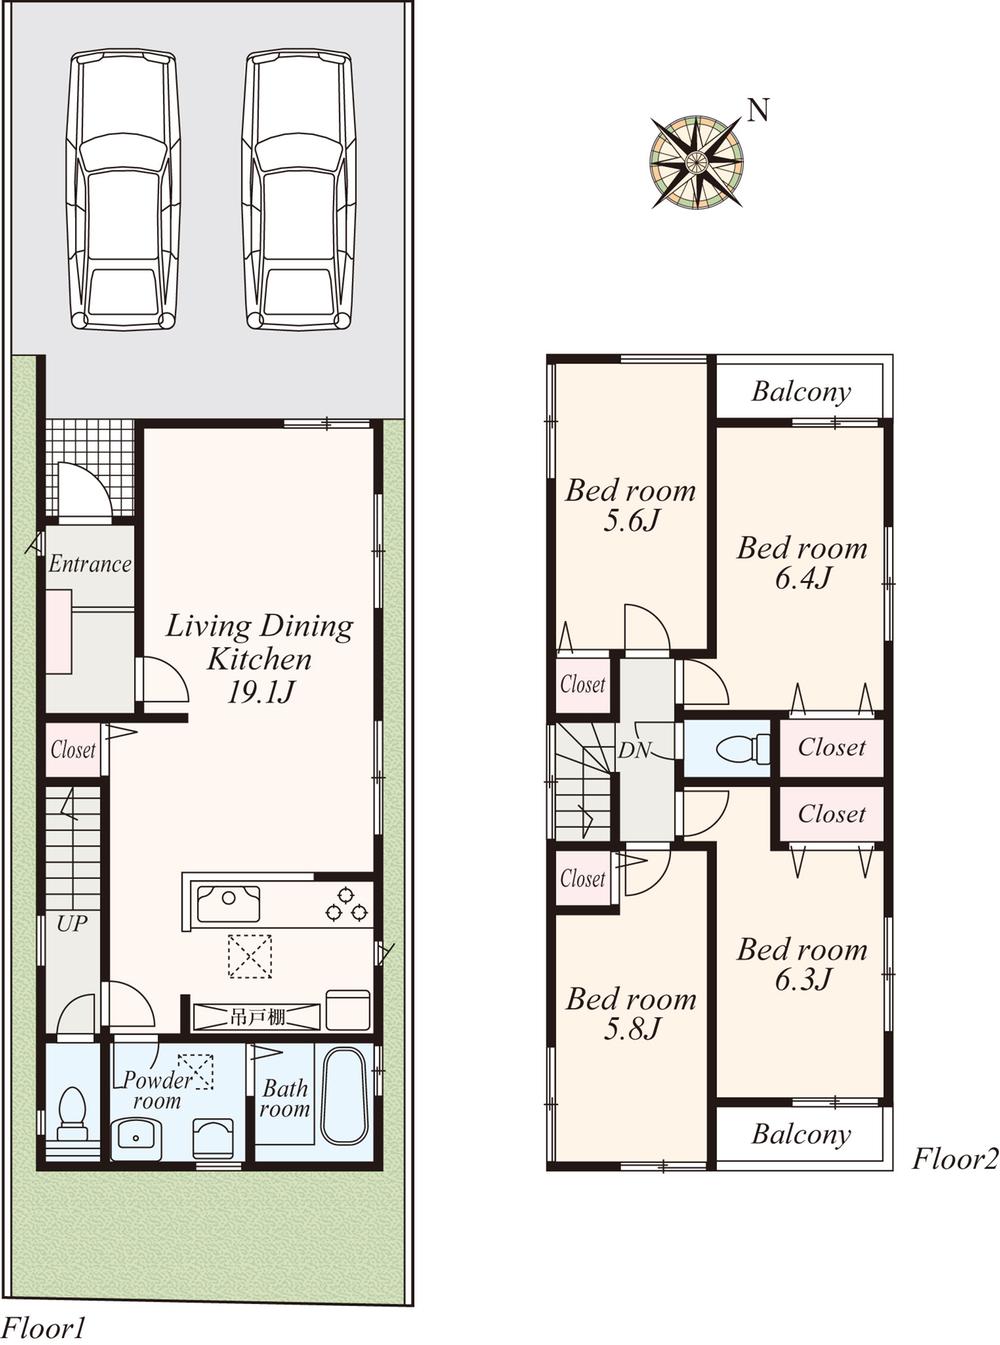 Floor plan. Finally 36 House of streets is completed. It offers also serves as the perfect living environment to the child-rearing! For more information, please contact us.